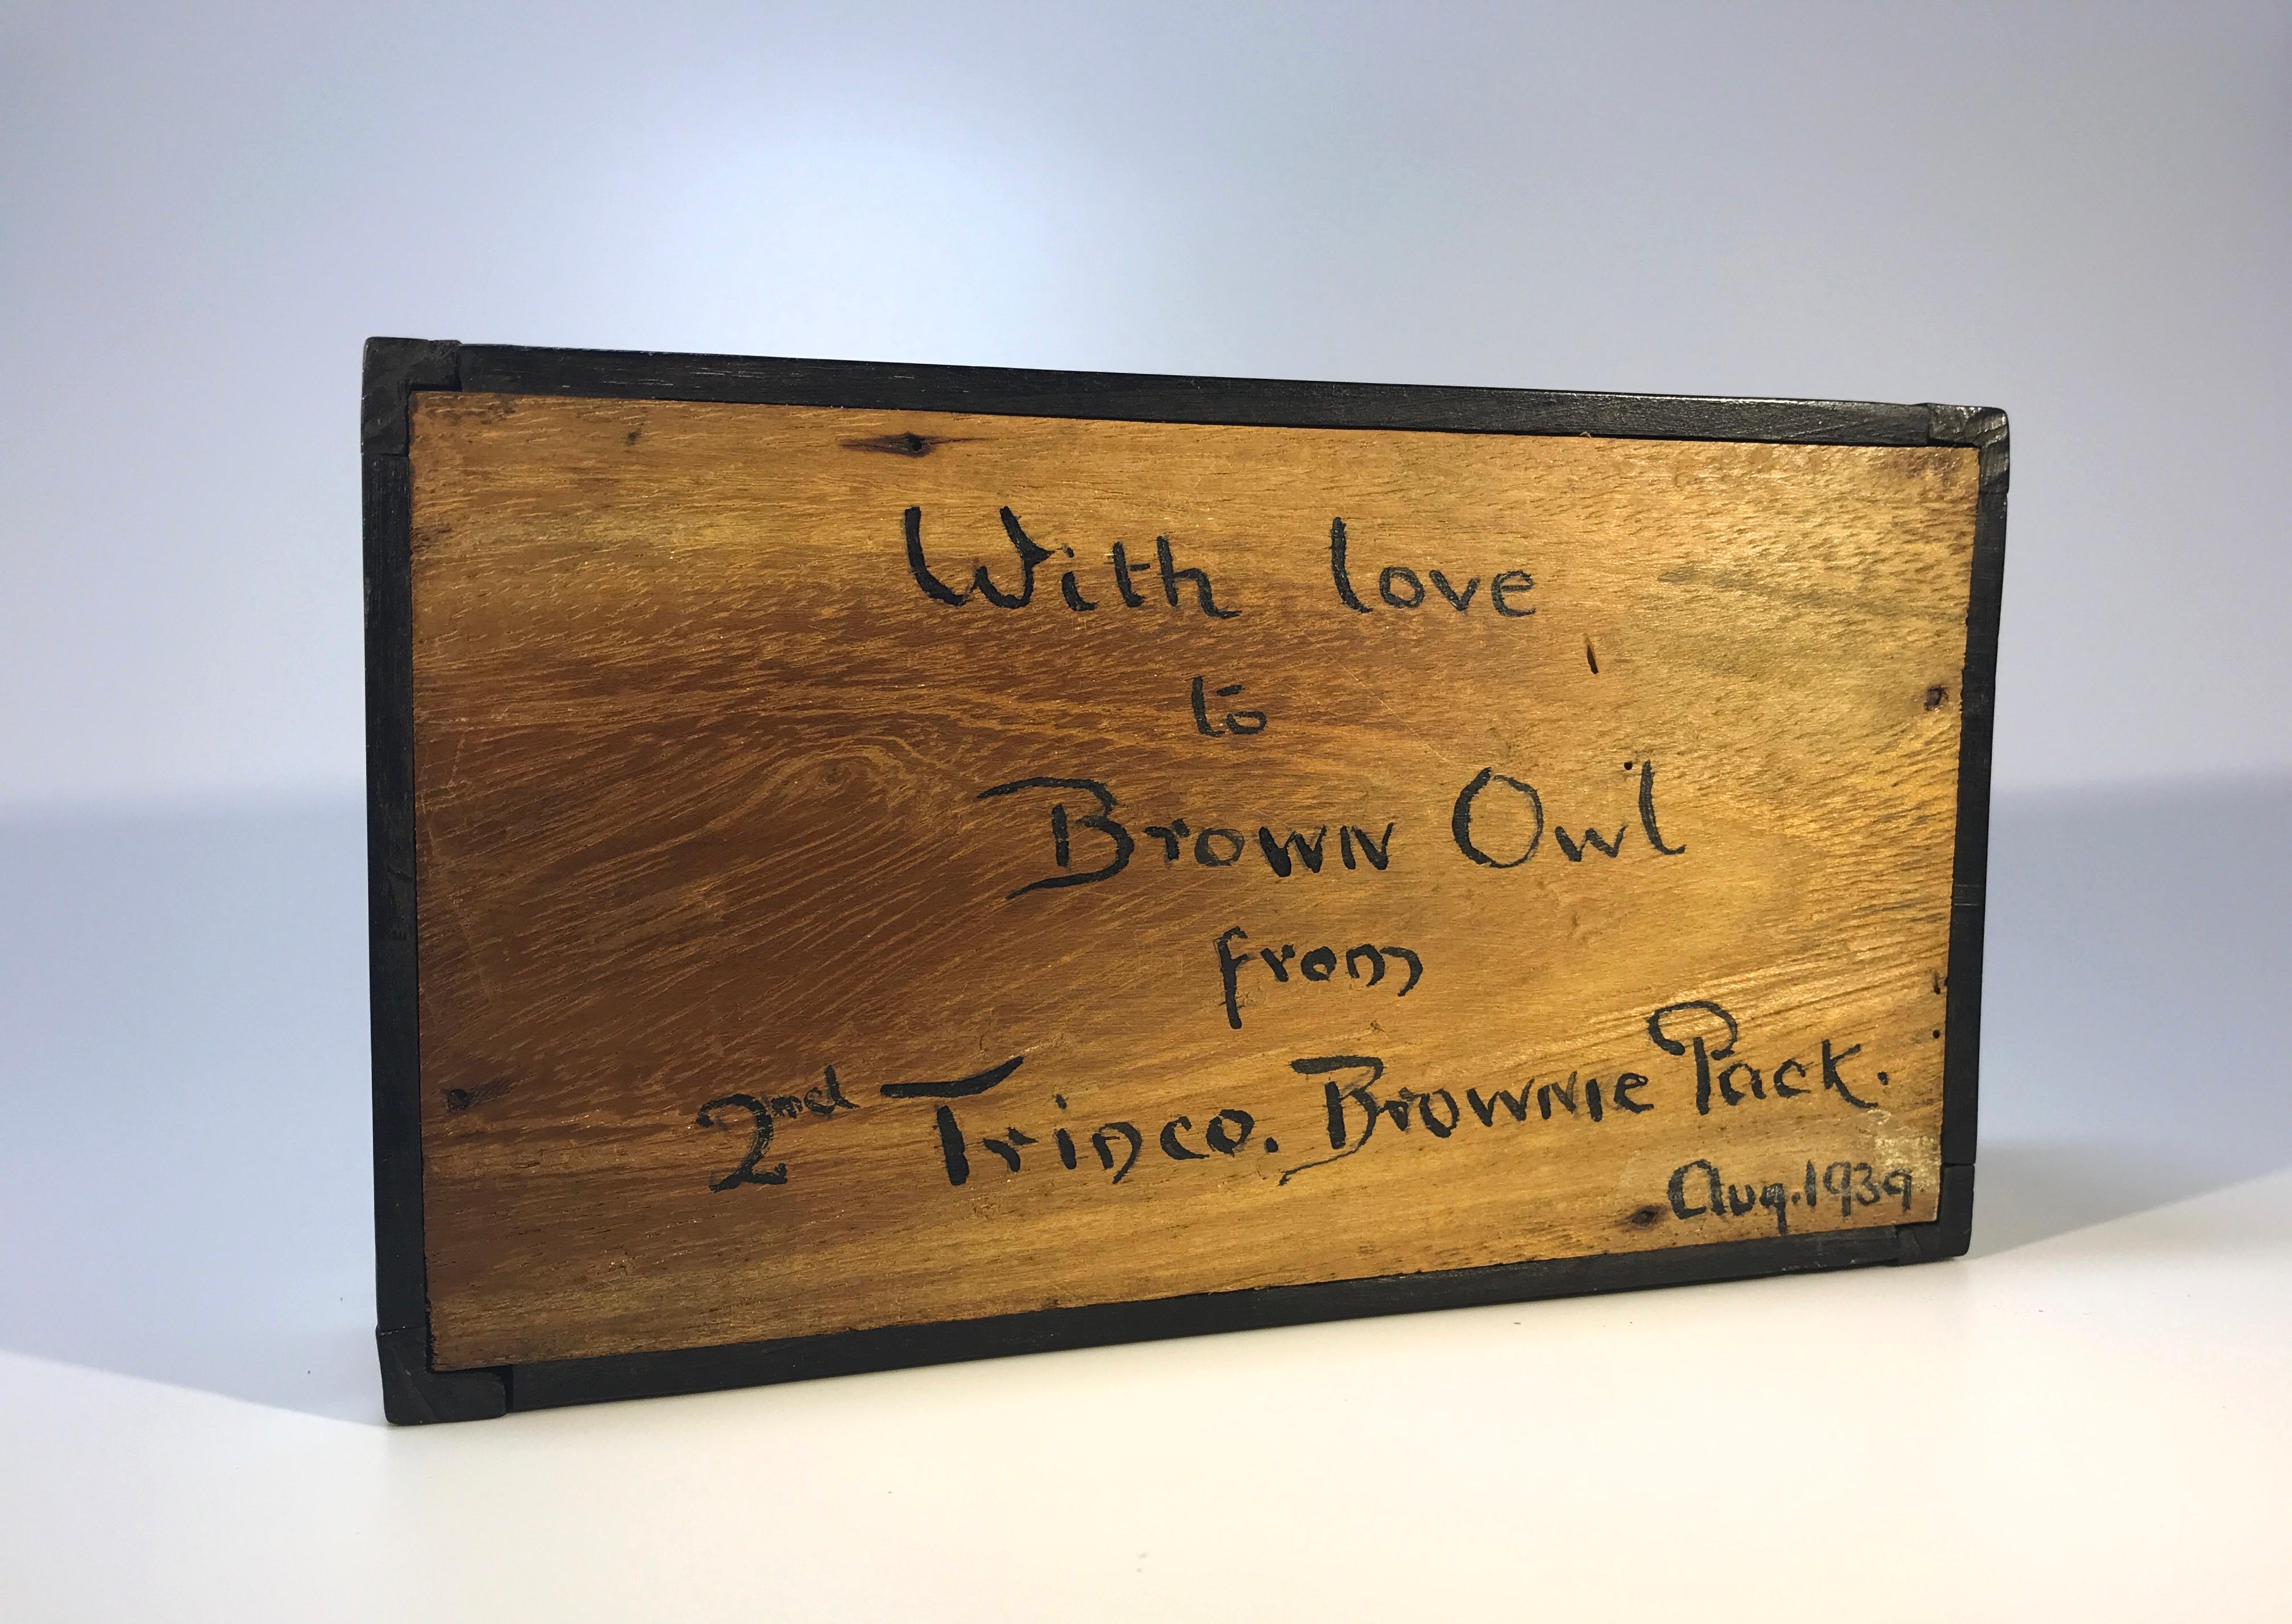 Charming Ceylonese rectangular porcupine quill box with ebonized casing and inlaid bone decoration. The sliding lid reveals a plain cedar wood interior.
Delightful handwritten message on base 'With love to Brown Owl from 2nd Trinco Brownie Pack,